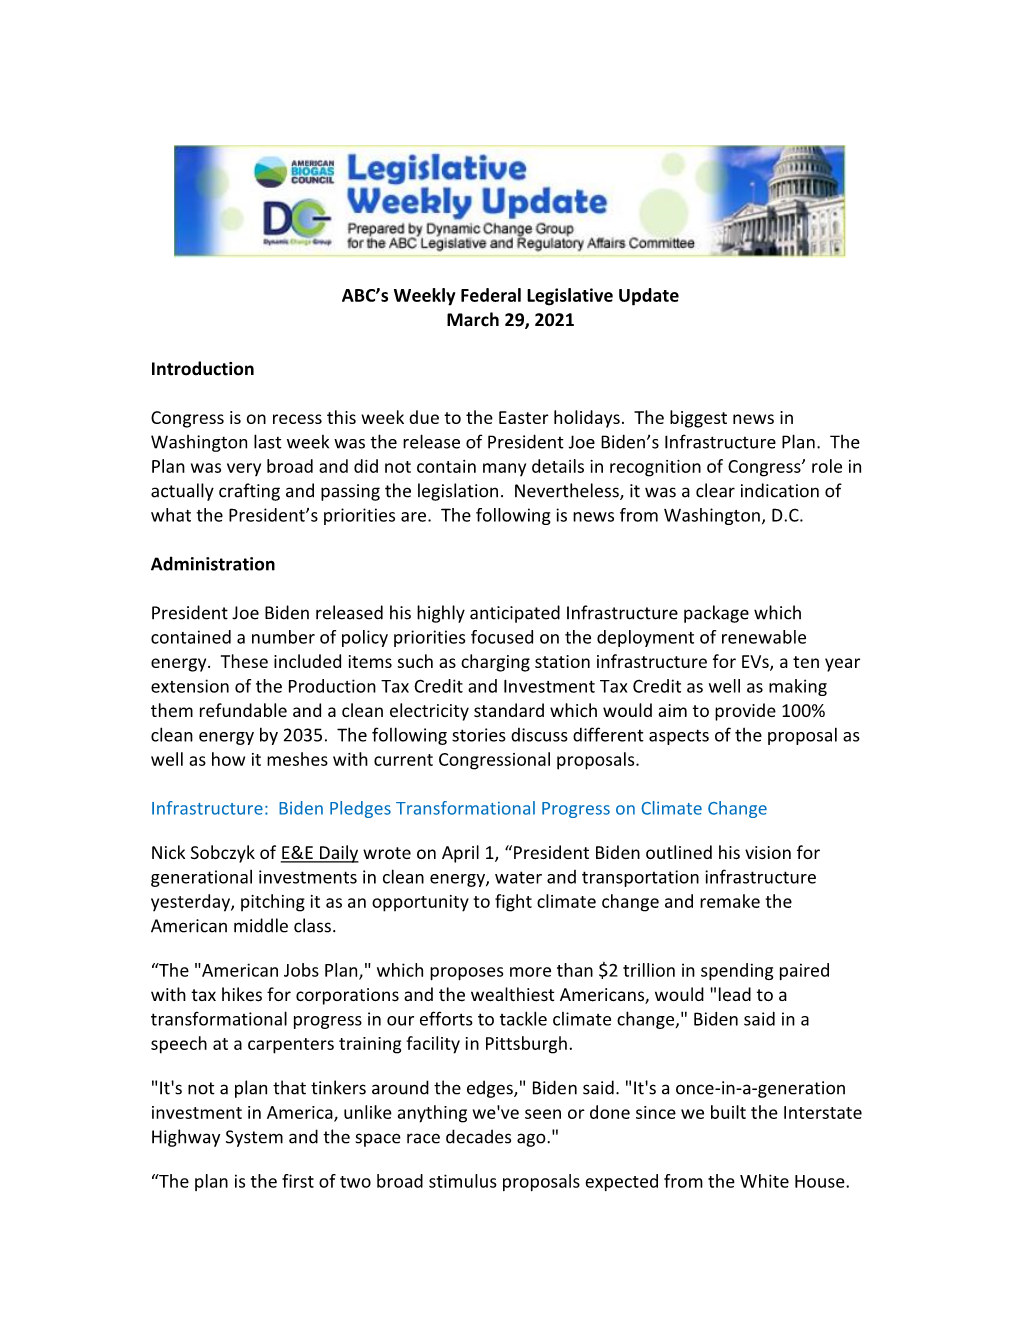 ABC's Weekly Federal Legislative Update March 29, 2021 Introduction